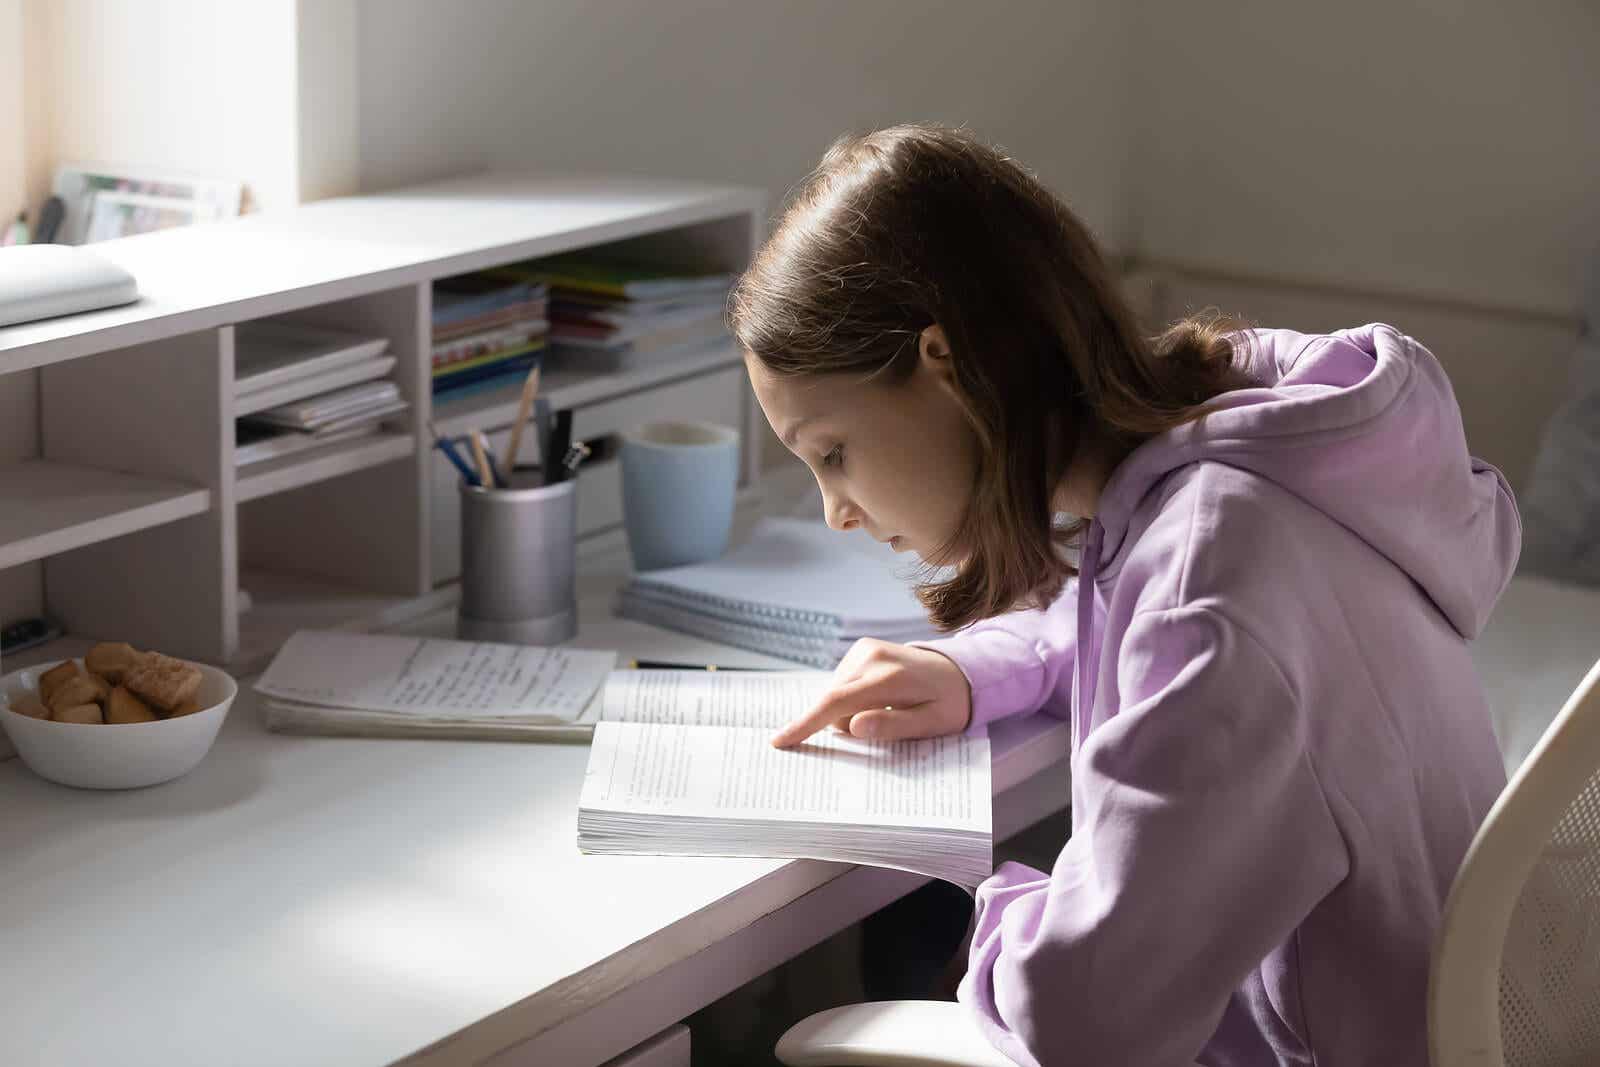 A preteen studying at her desk.